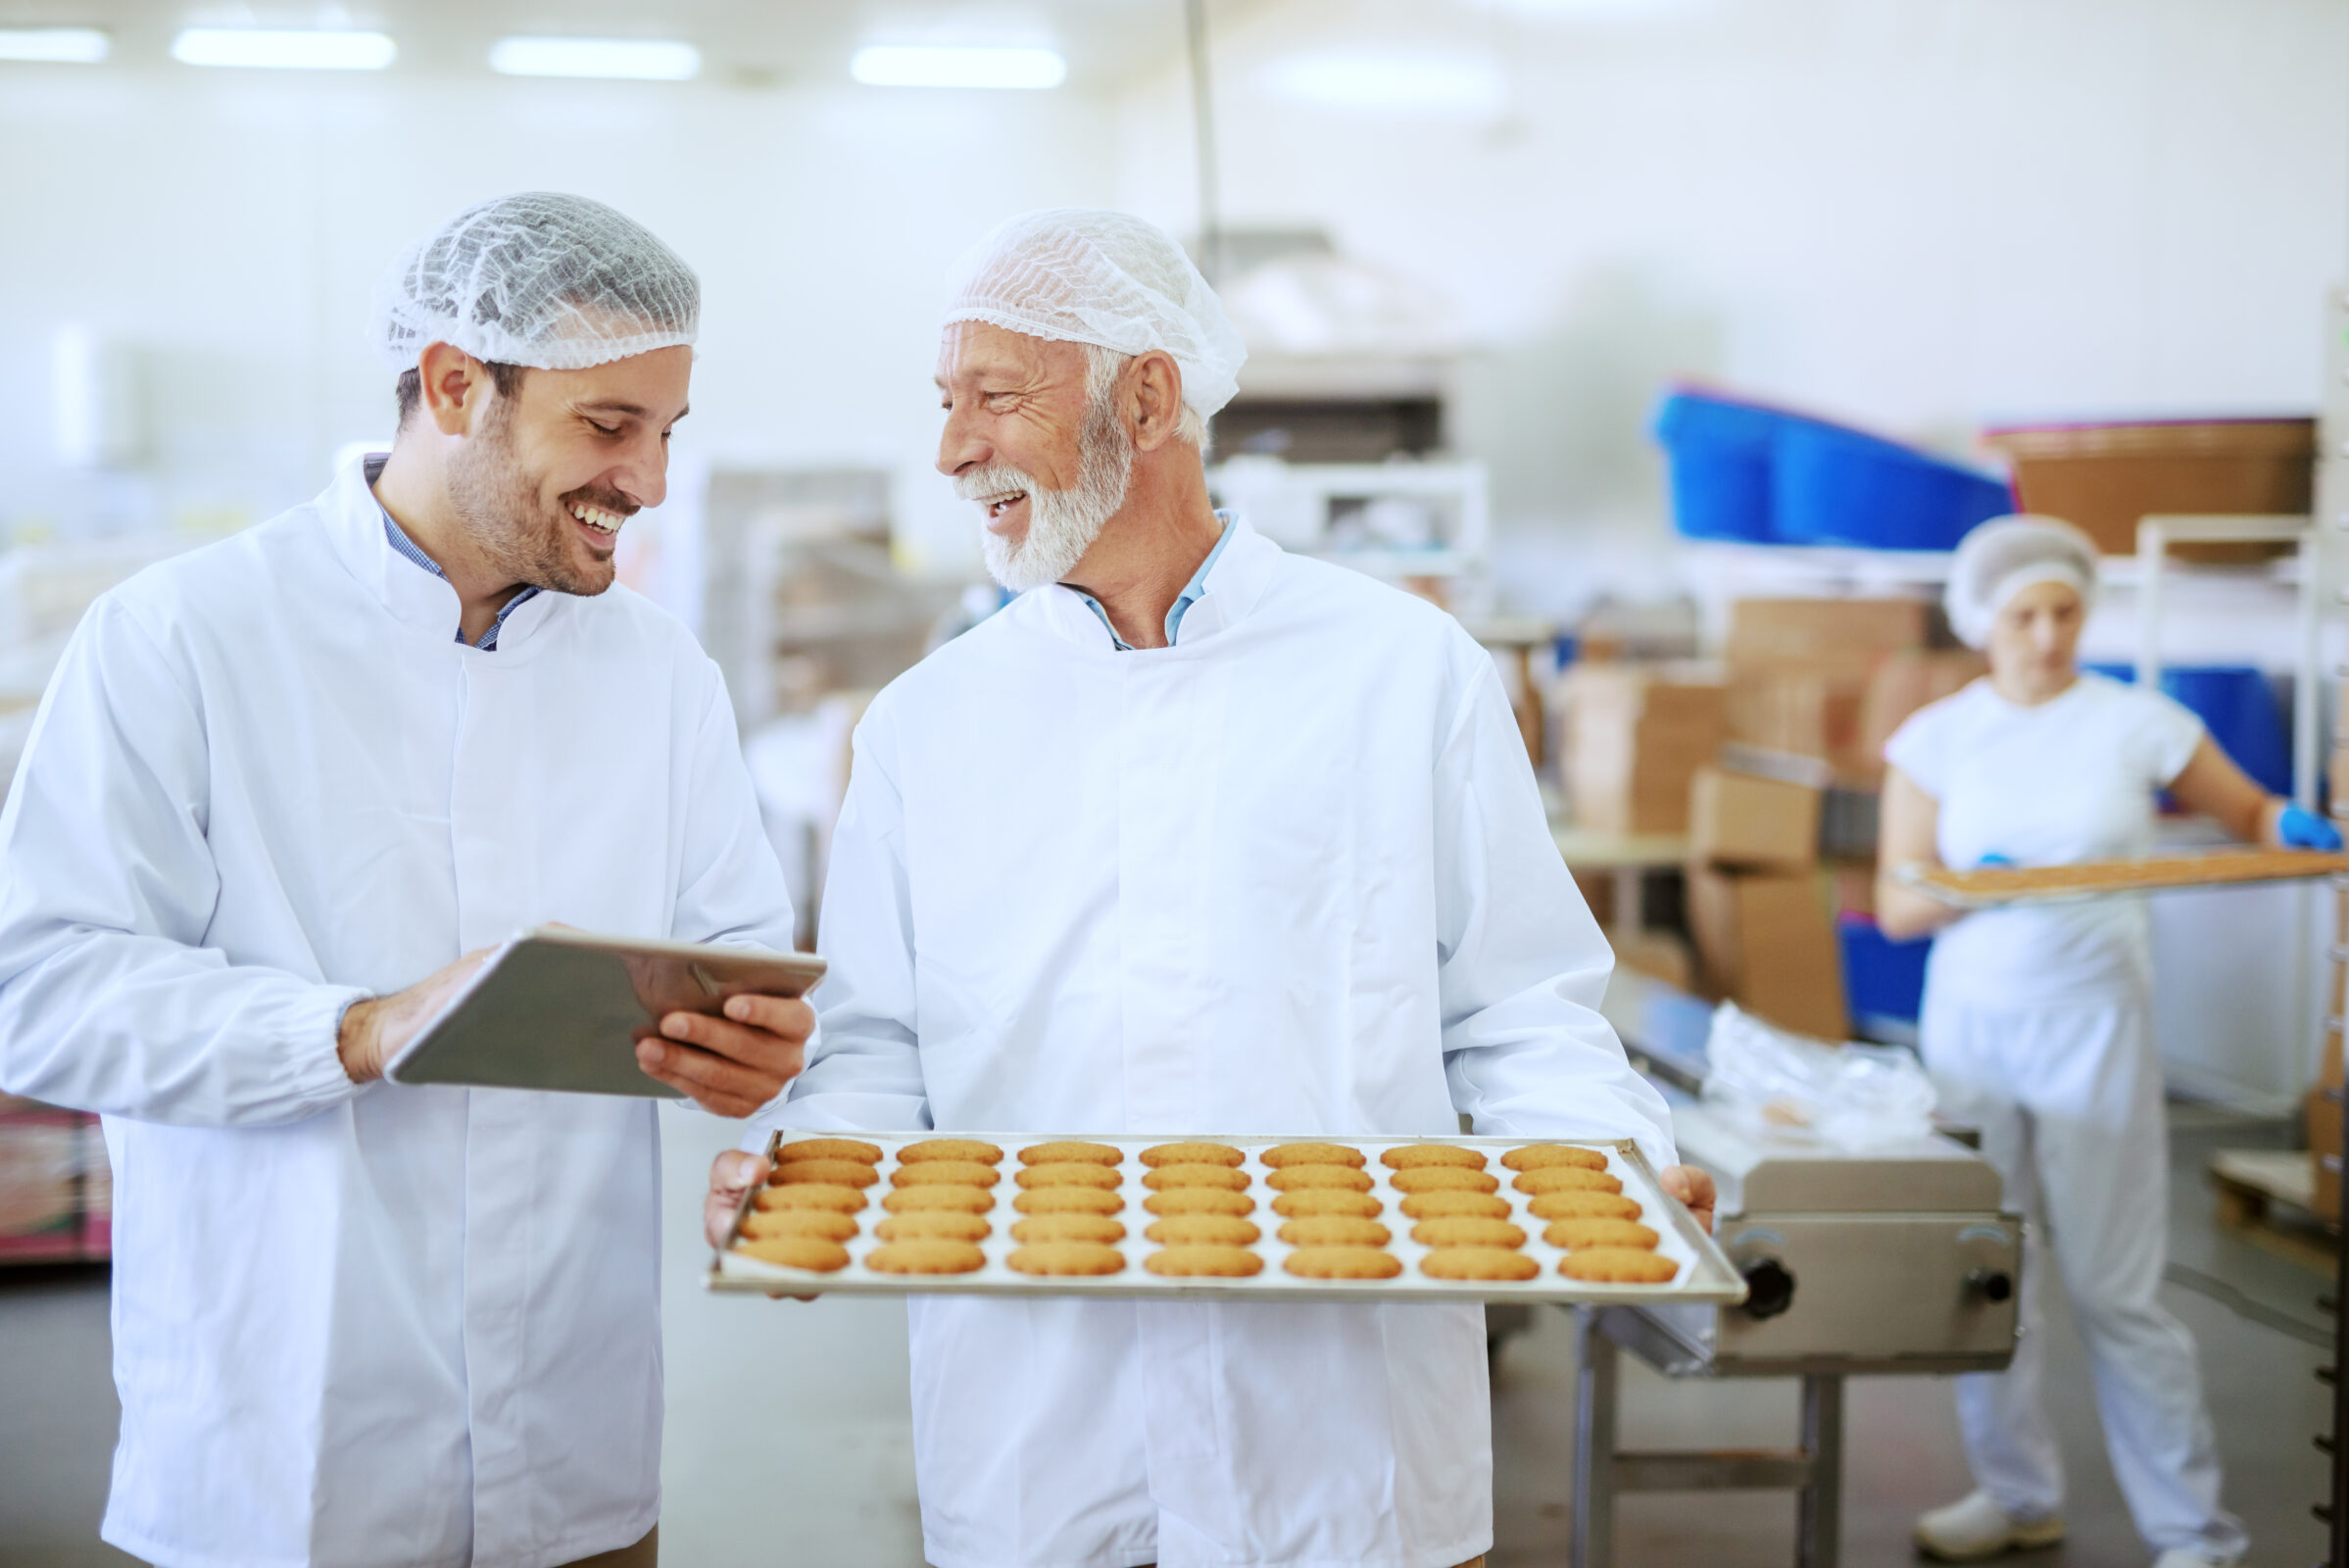 Ultra-broadband and the food industry: growing thanks to connectivity